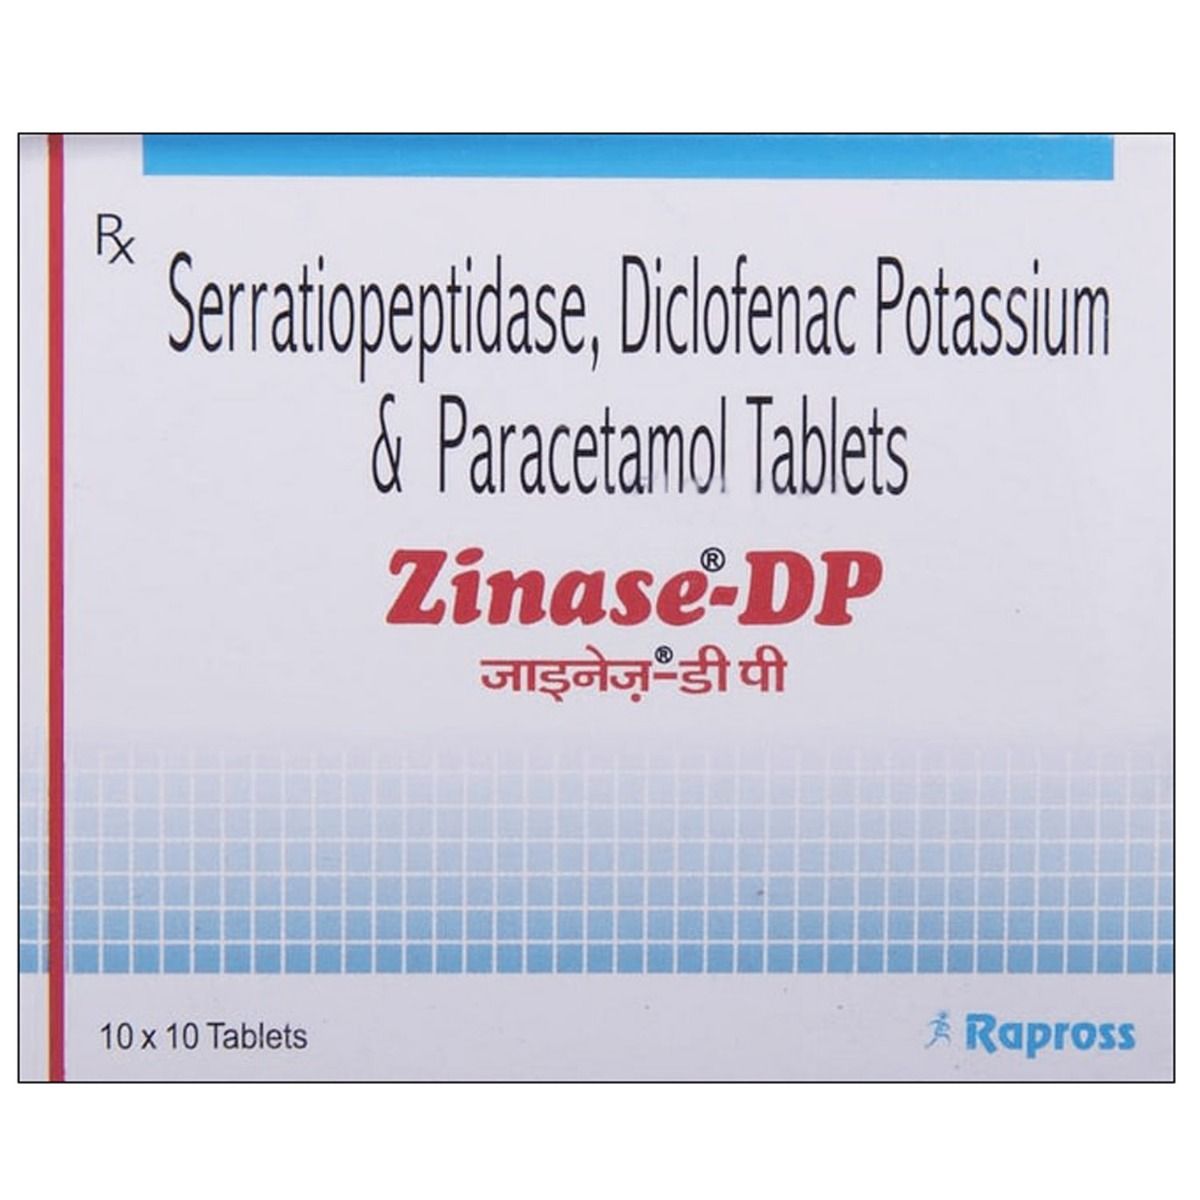 Zinase-DP Tablet 10's Price, Uses, Side Effects, Composition ...